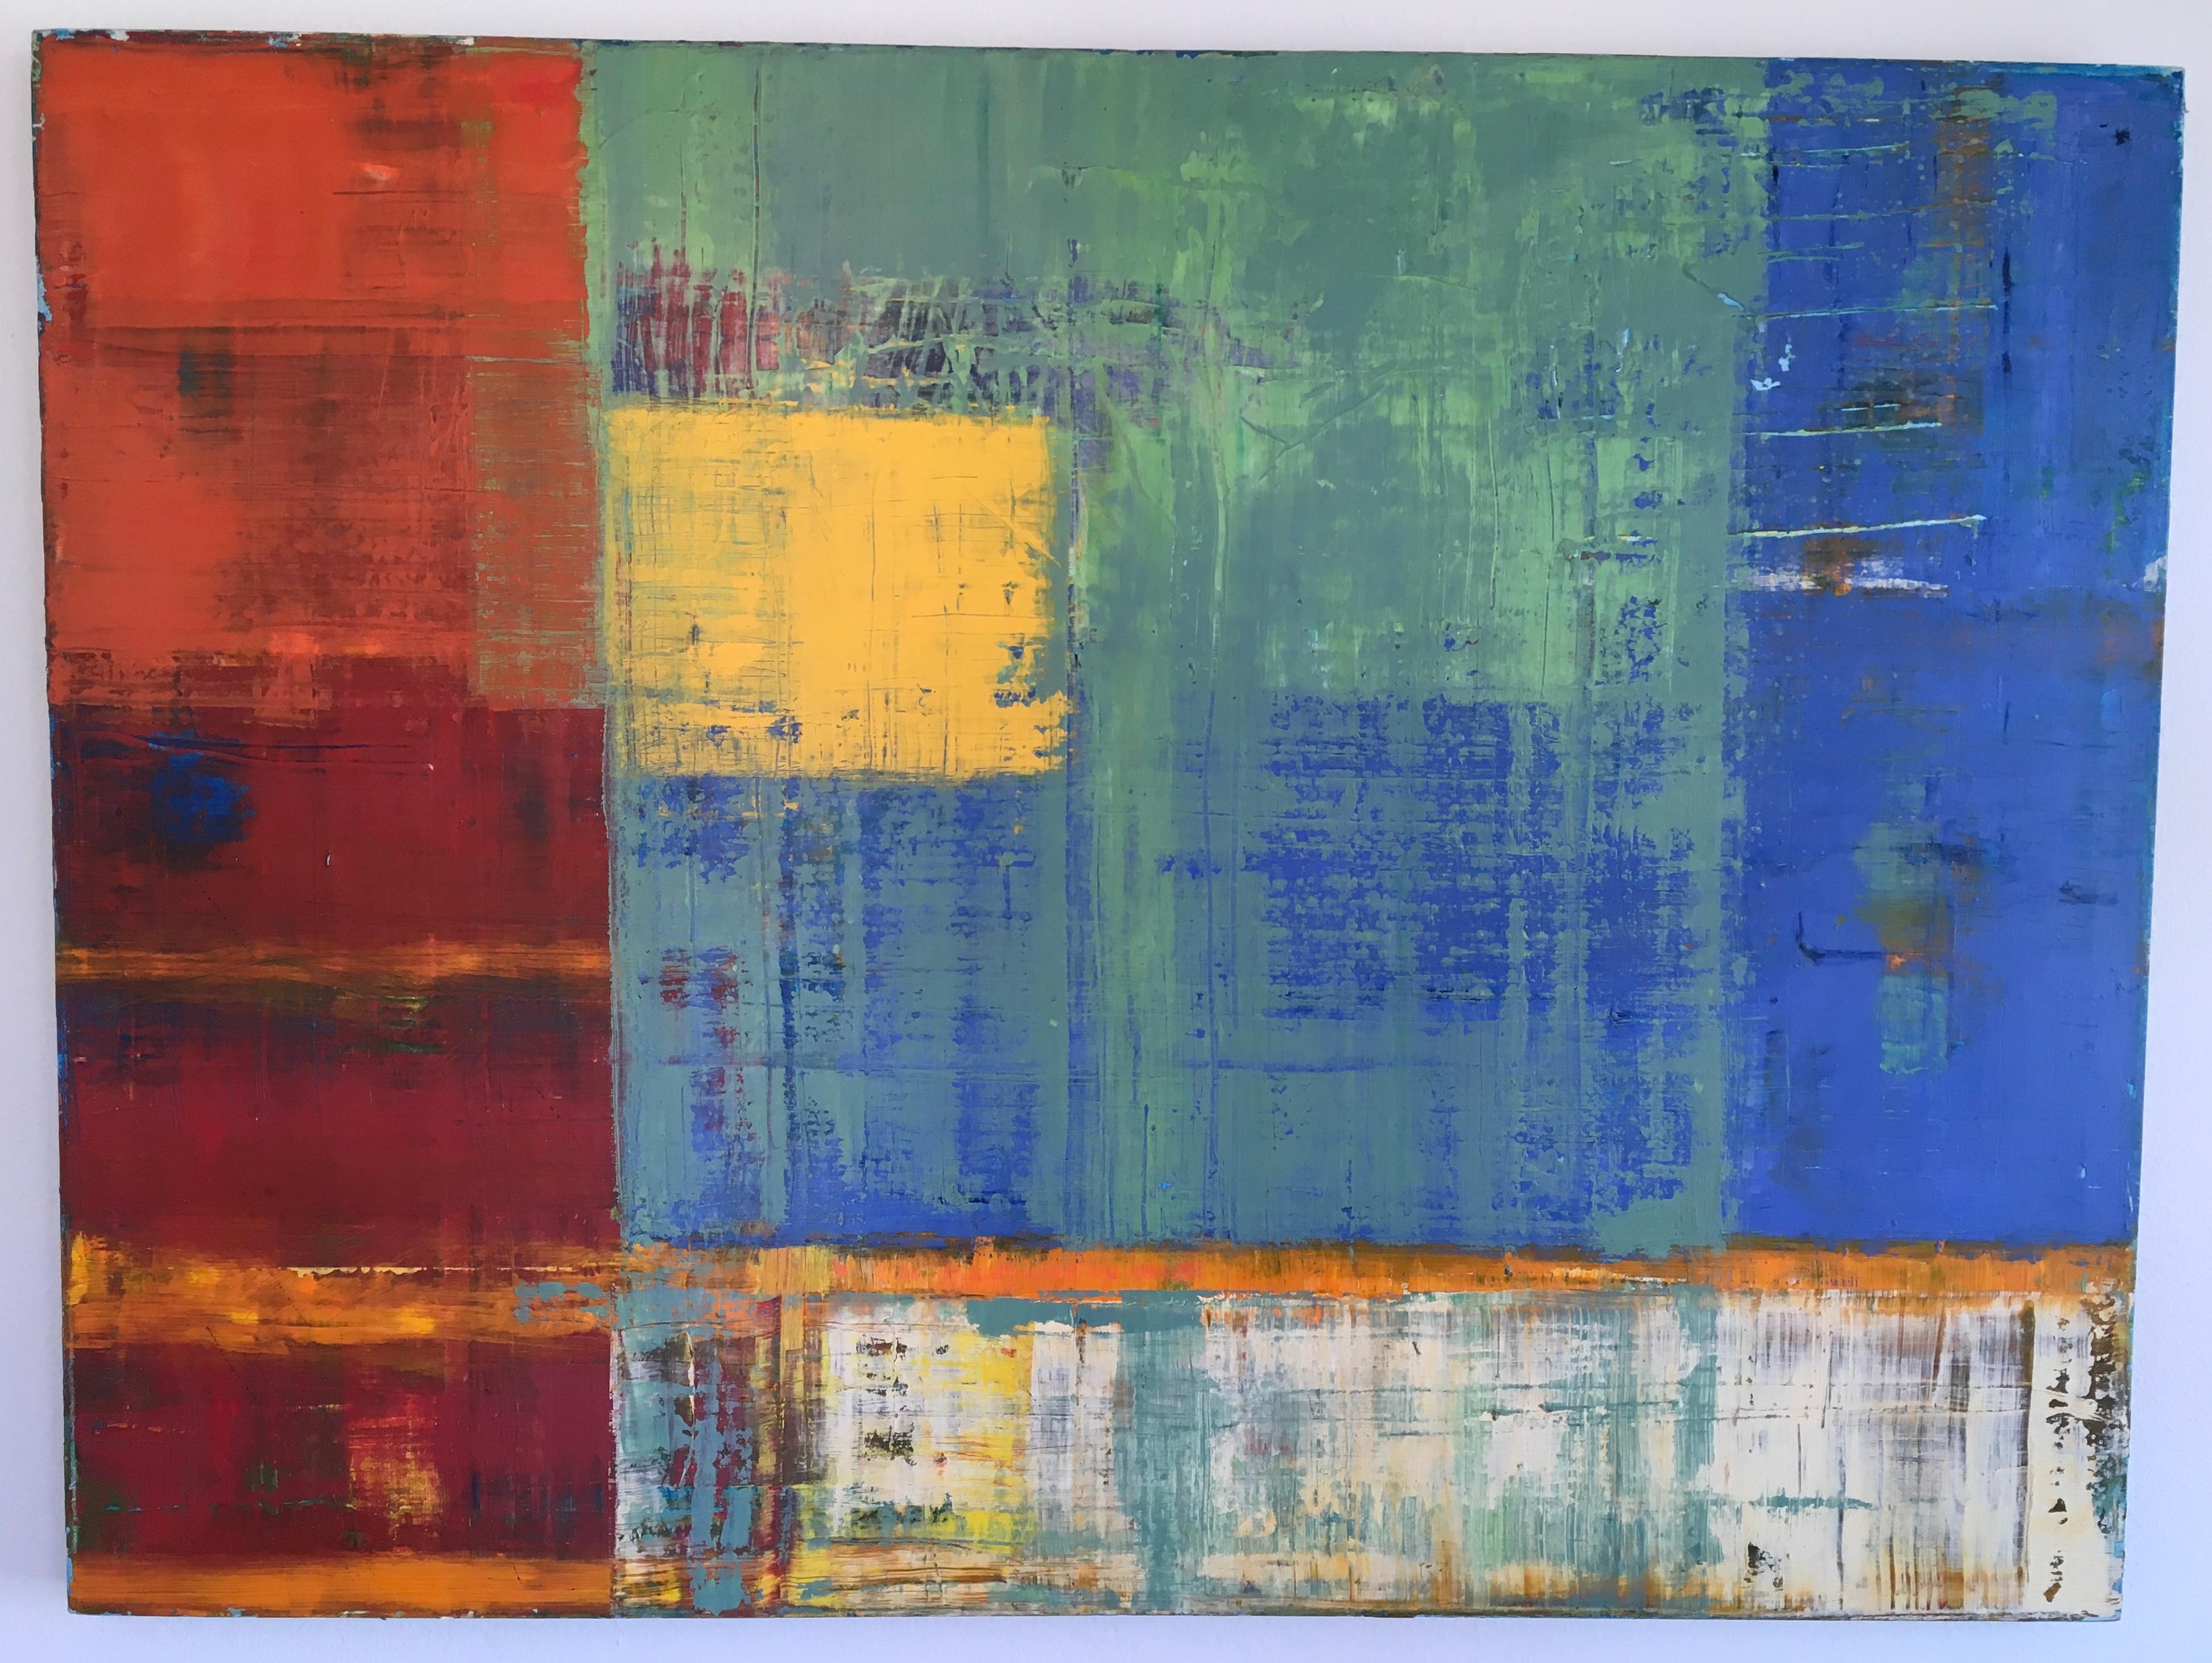 "Cabana", by Anthony Dyke is a 36" x 48" x 1.5" oil on canvas painting. Its flag-like imagery is influenced by Jasper Johns' flag paintings. The layered and scraped surface in tropical blues, greens, whites and yellow, and its horizontal banding